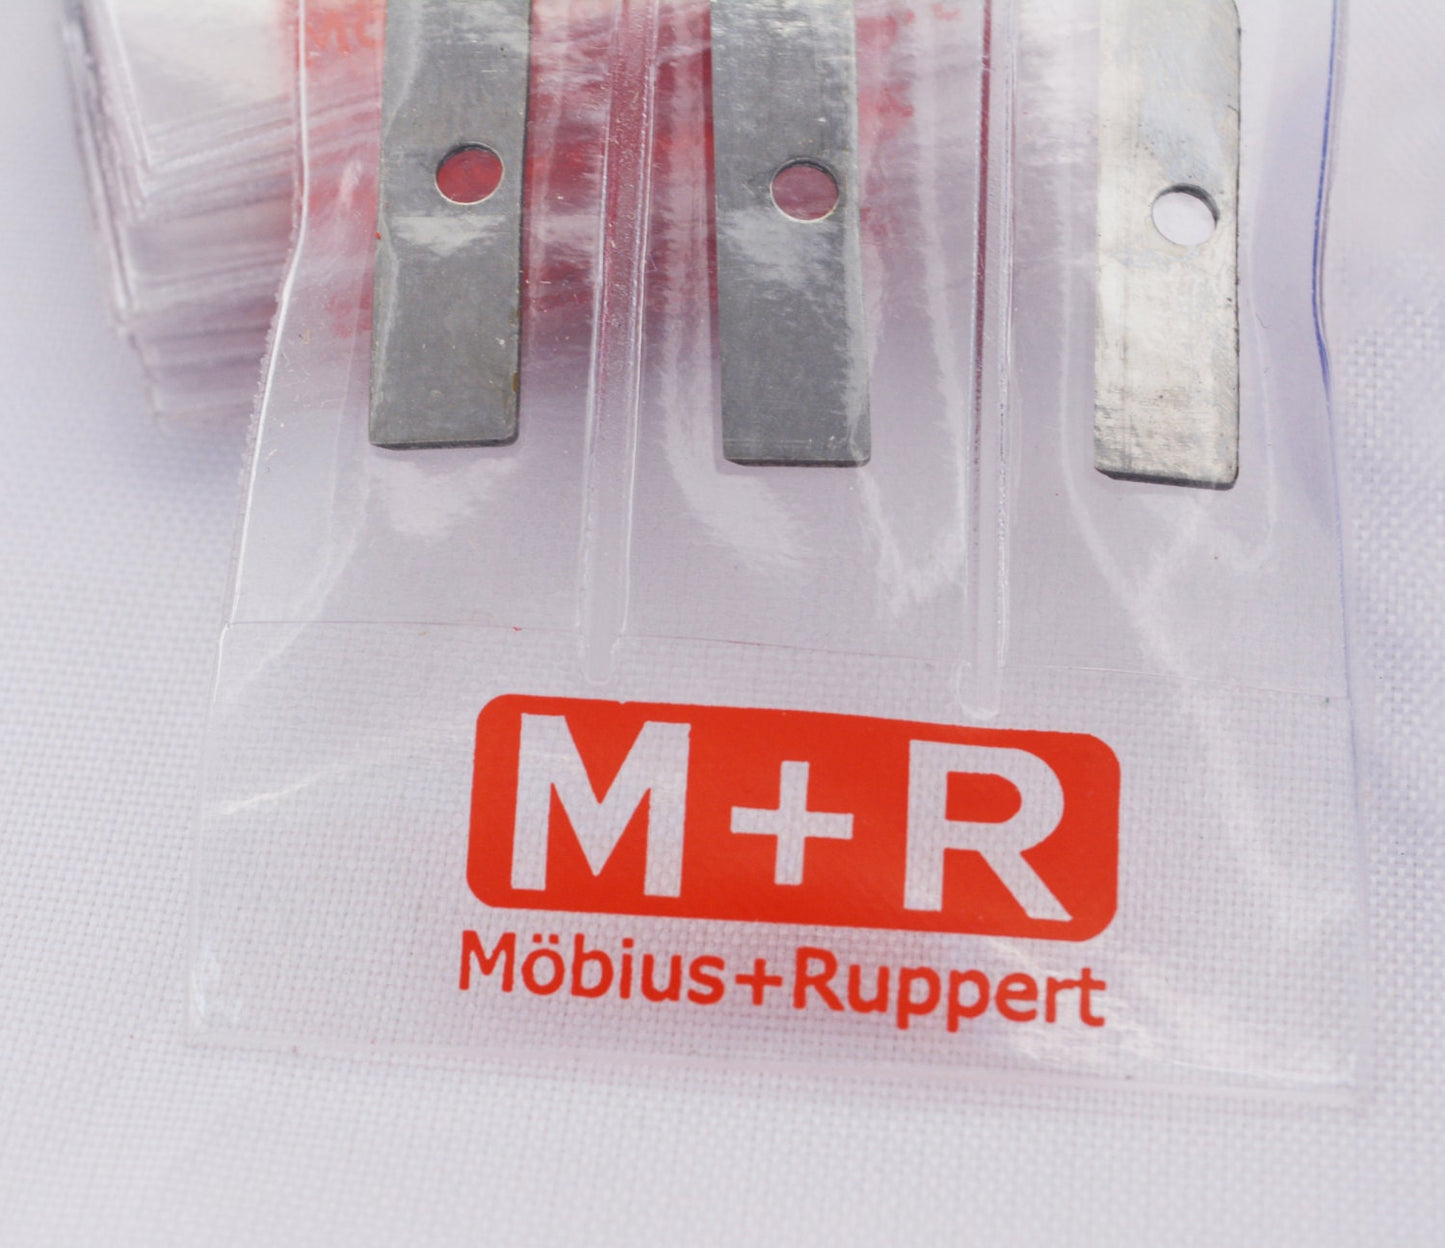 Mobius + Ruppert (M+R) Sharpener Replacement Blades - 3 or 10 pack -  Made in Germany - finest in the world!